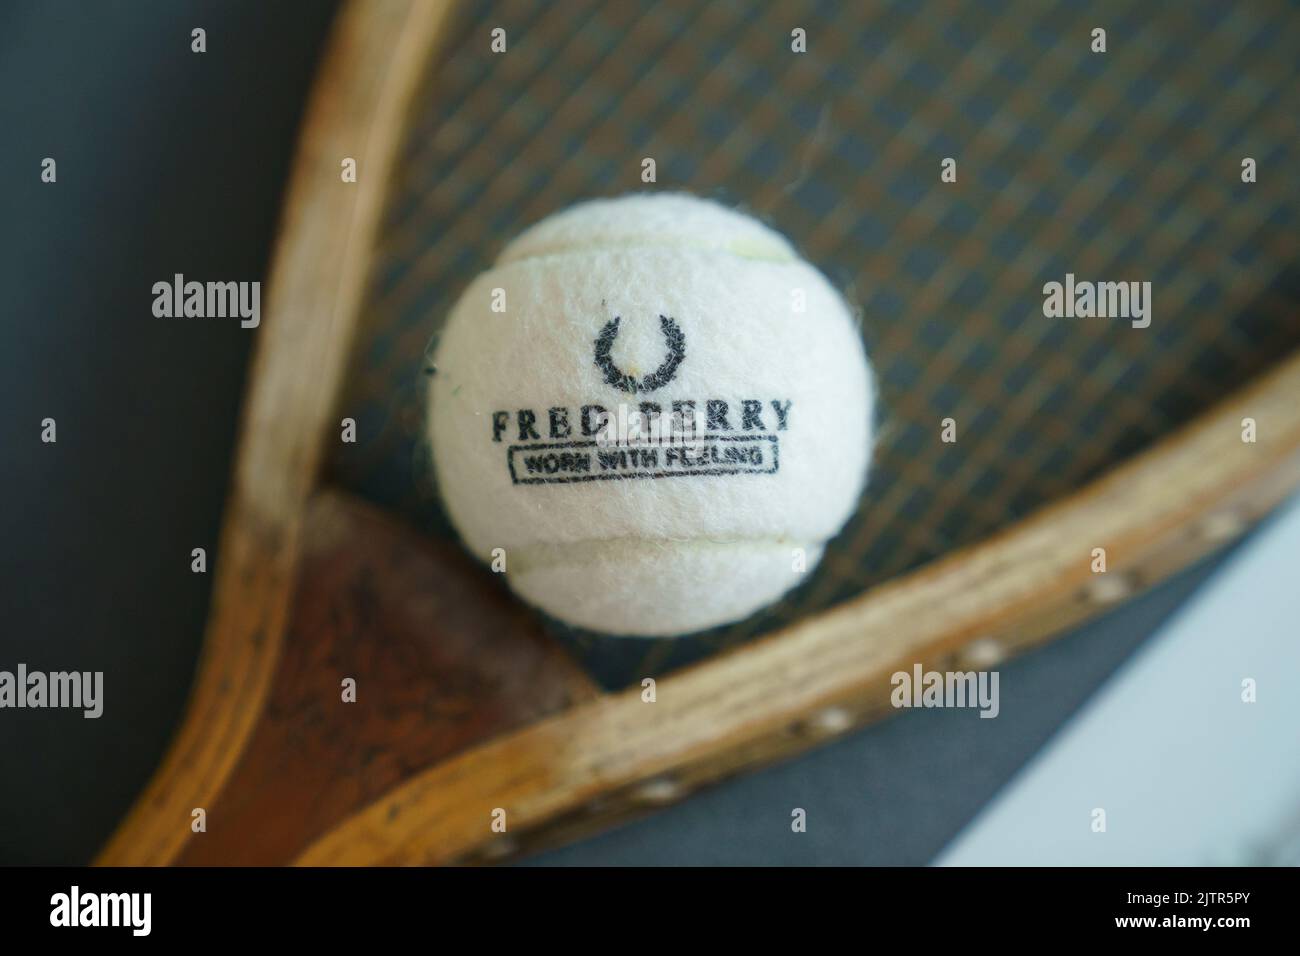 Fred Perry tennis ball and old wooden racket at Wimbledon Championships Stock Photo